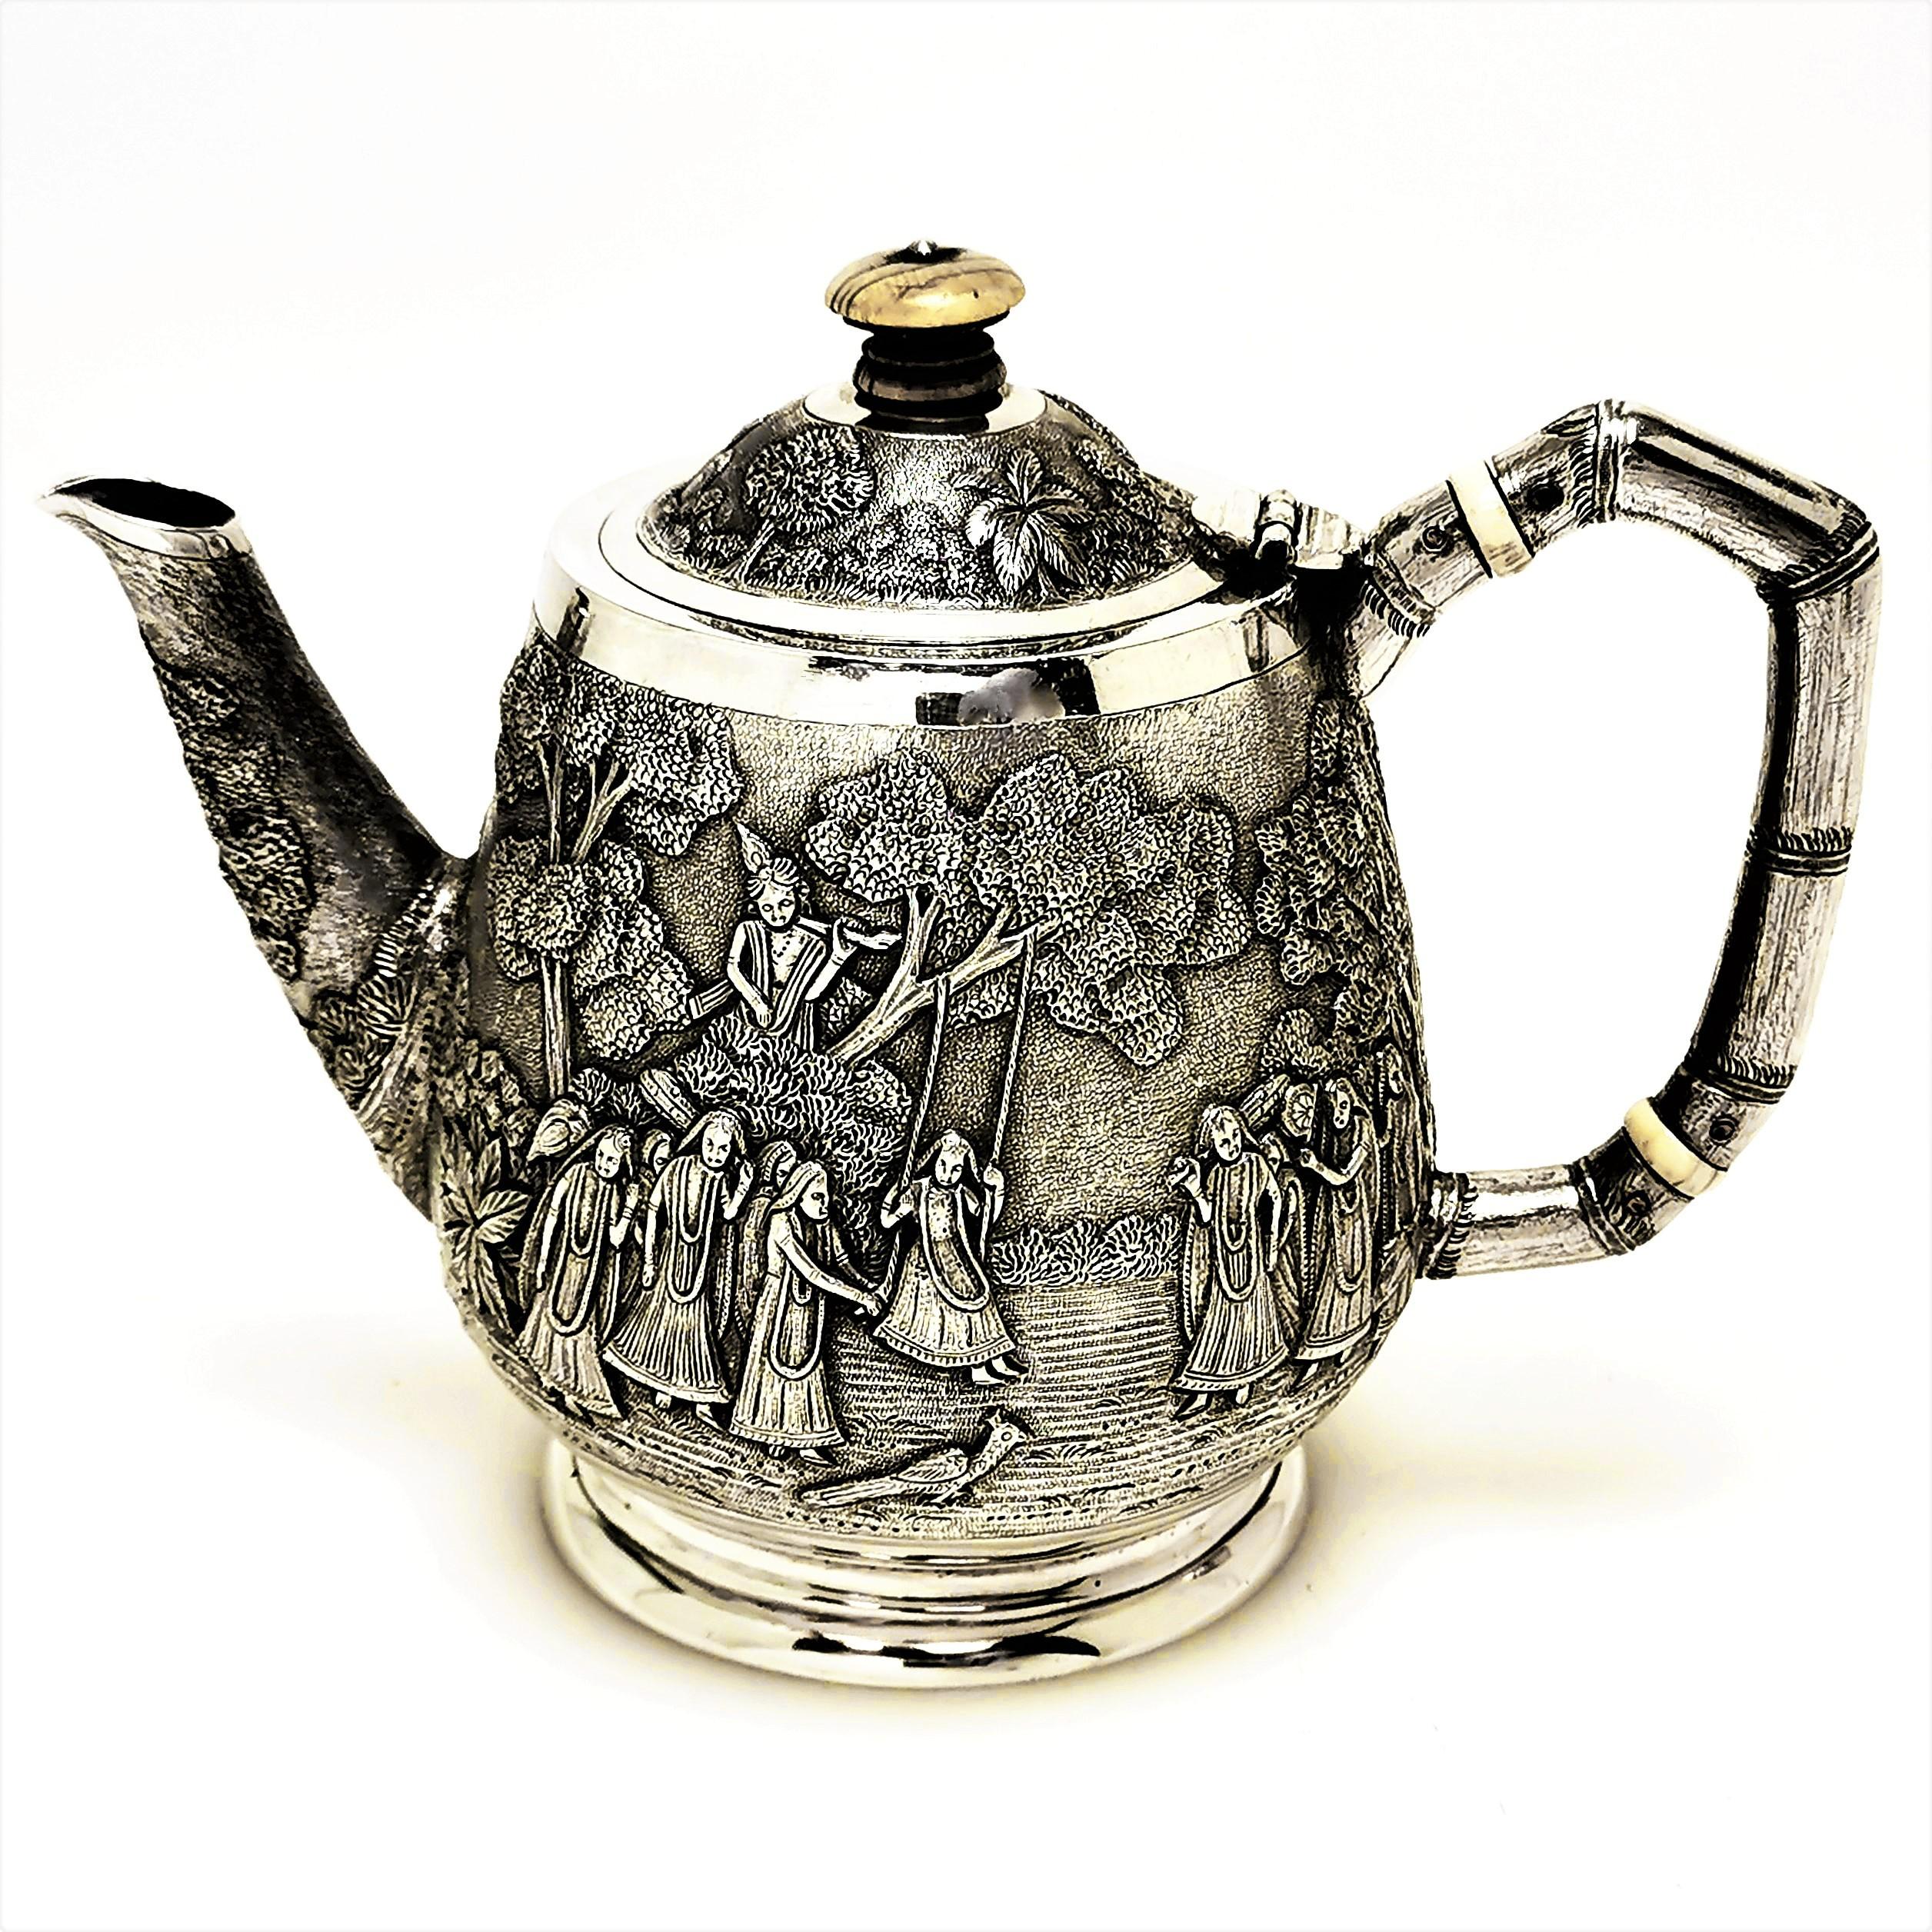 A beautiful Antique Indian Bachelor's Teapot decorated with a gorgeous chased design. The Design shows a group of women dancing on the one side and a pair of men driving cattle on the other. each group is shown surrounded by leafy trees and plants.